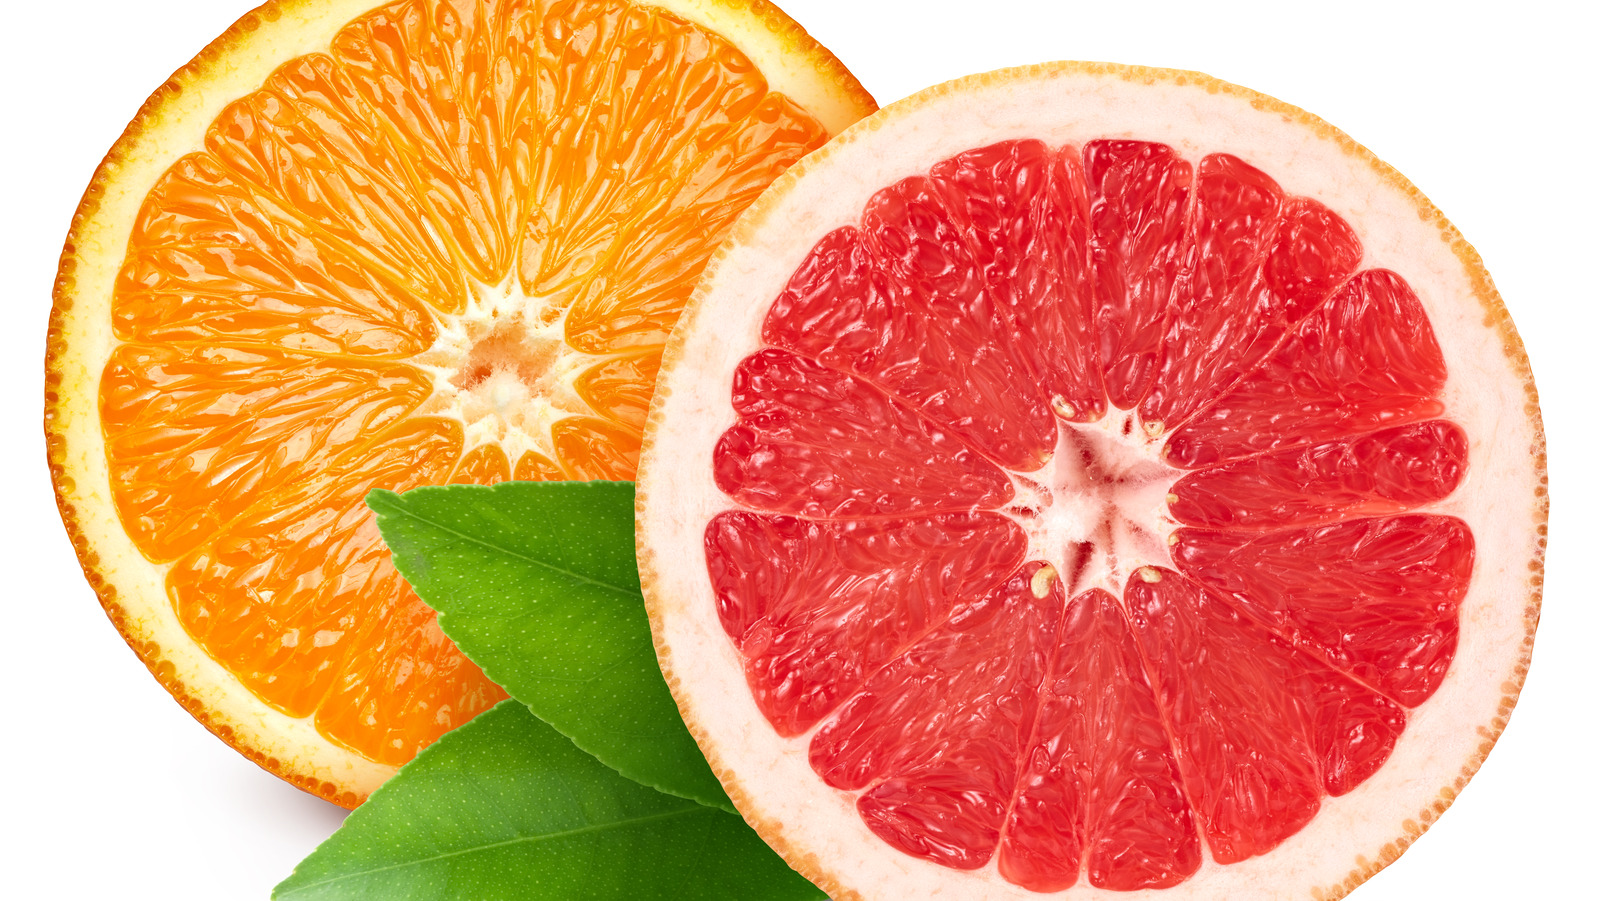 Is There A Difference Oranges? Nutritional Grapefruits Between And